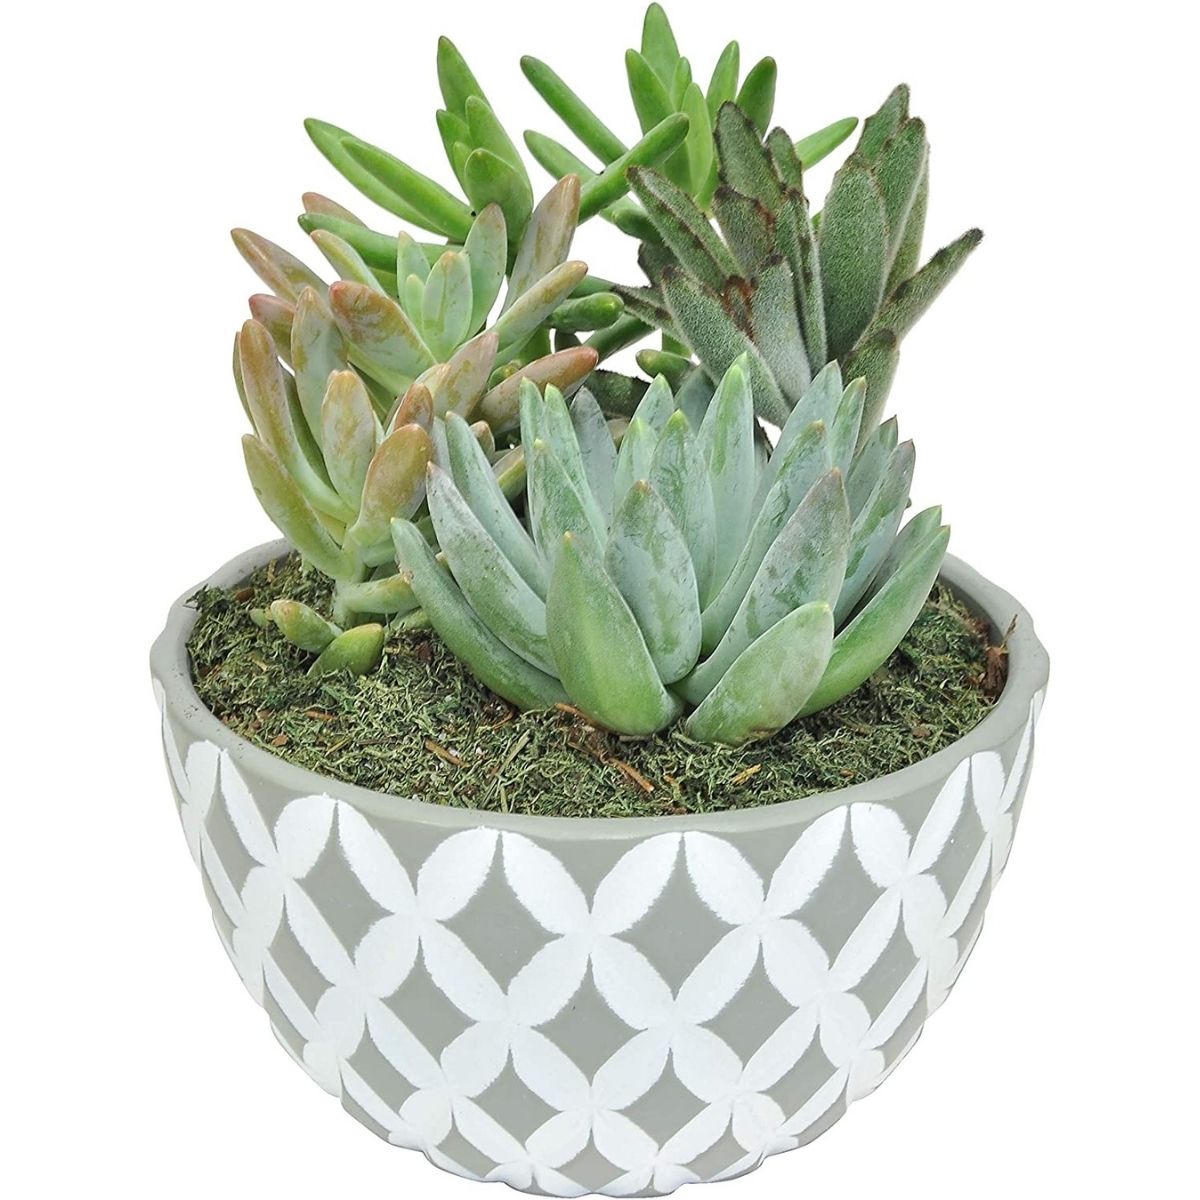 The Best Hostess Gifts Option: Costa Farms Succulents